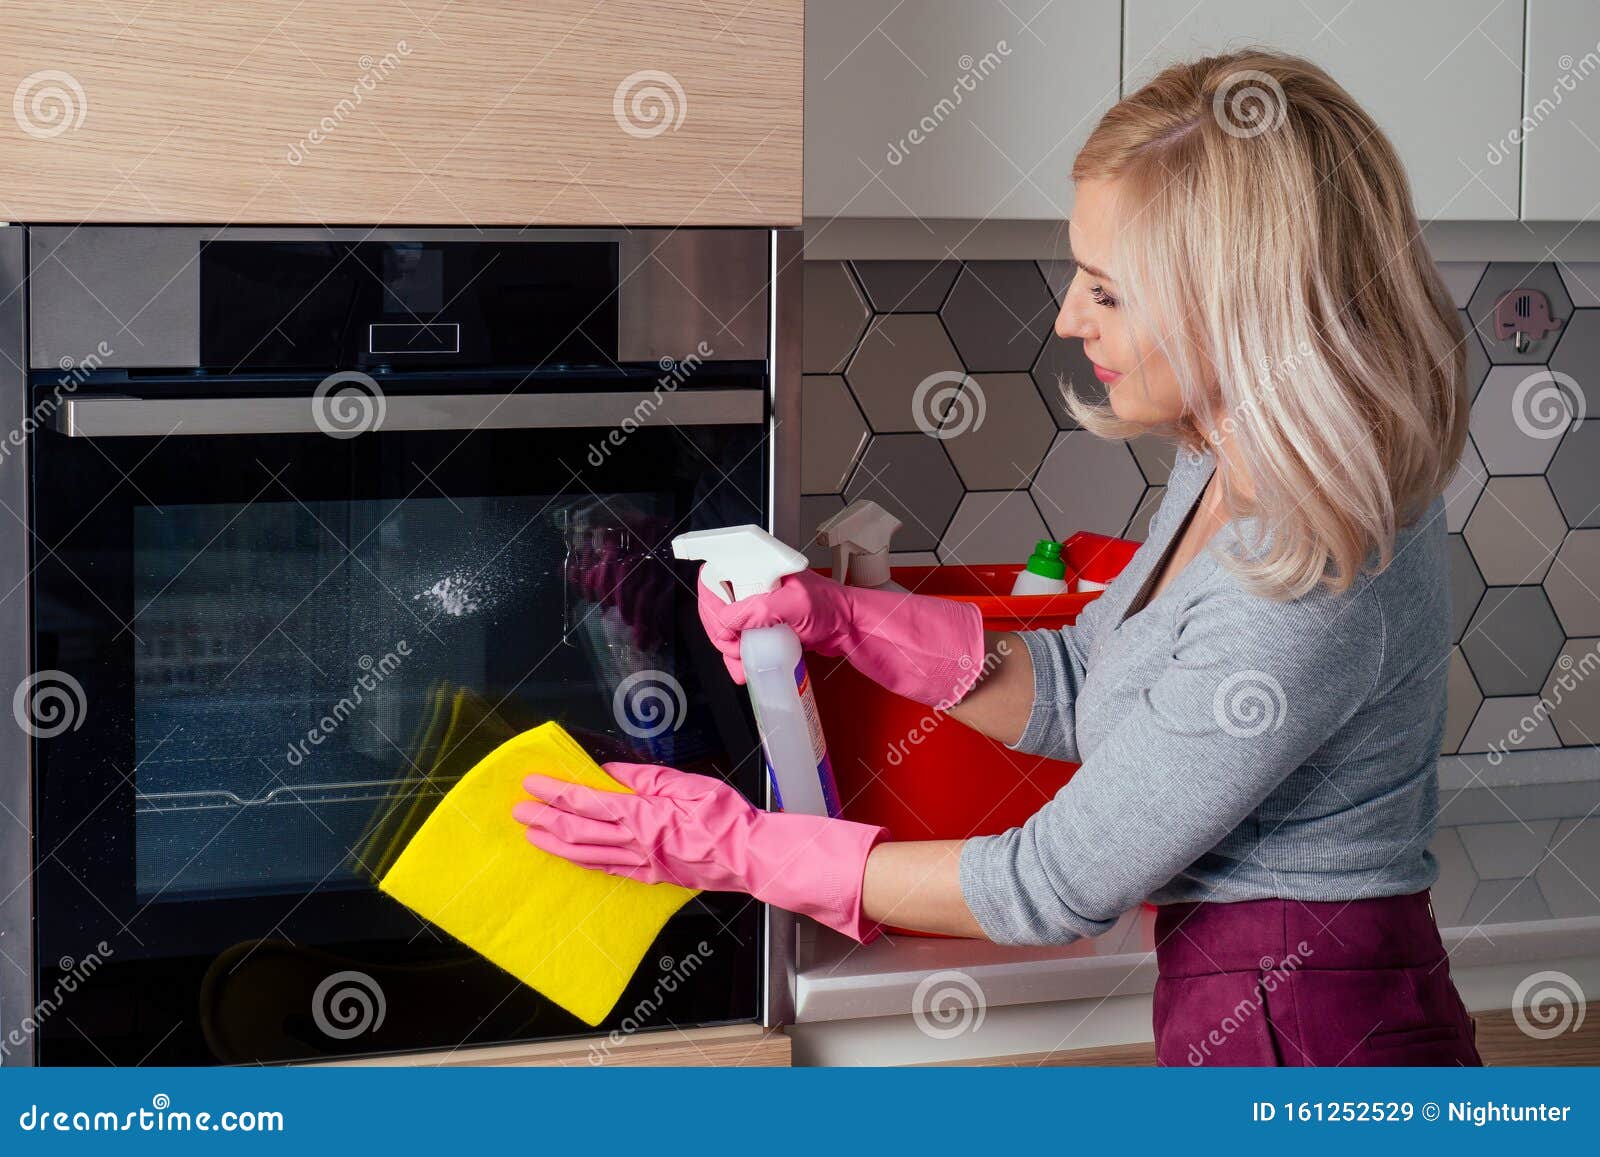 young woman cleaning oven in the kitchen